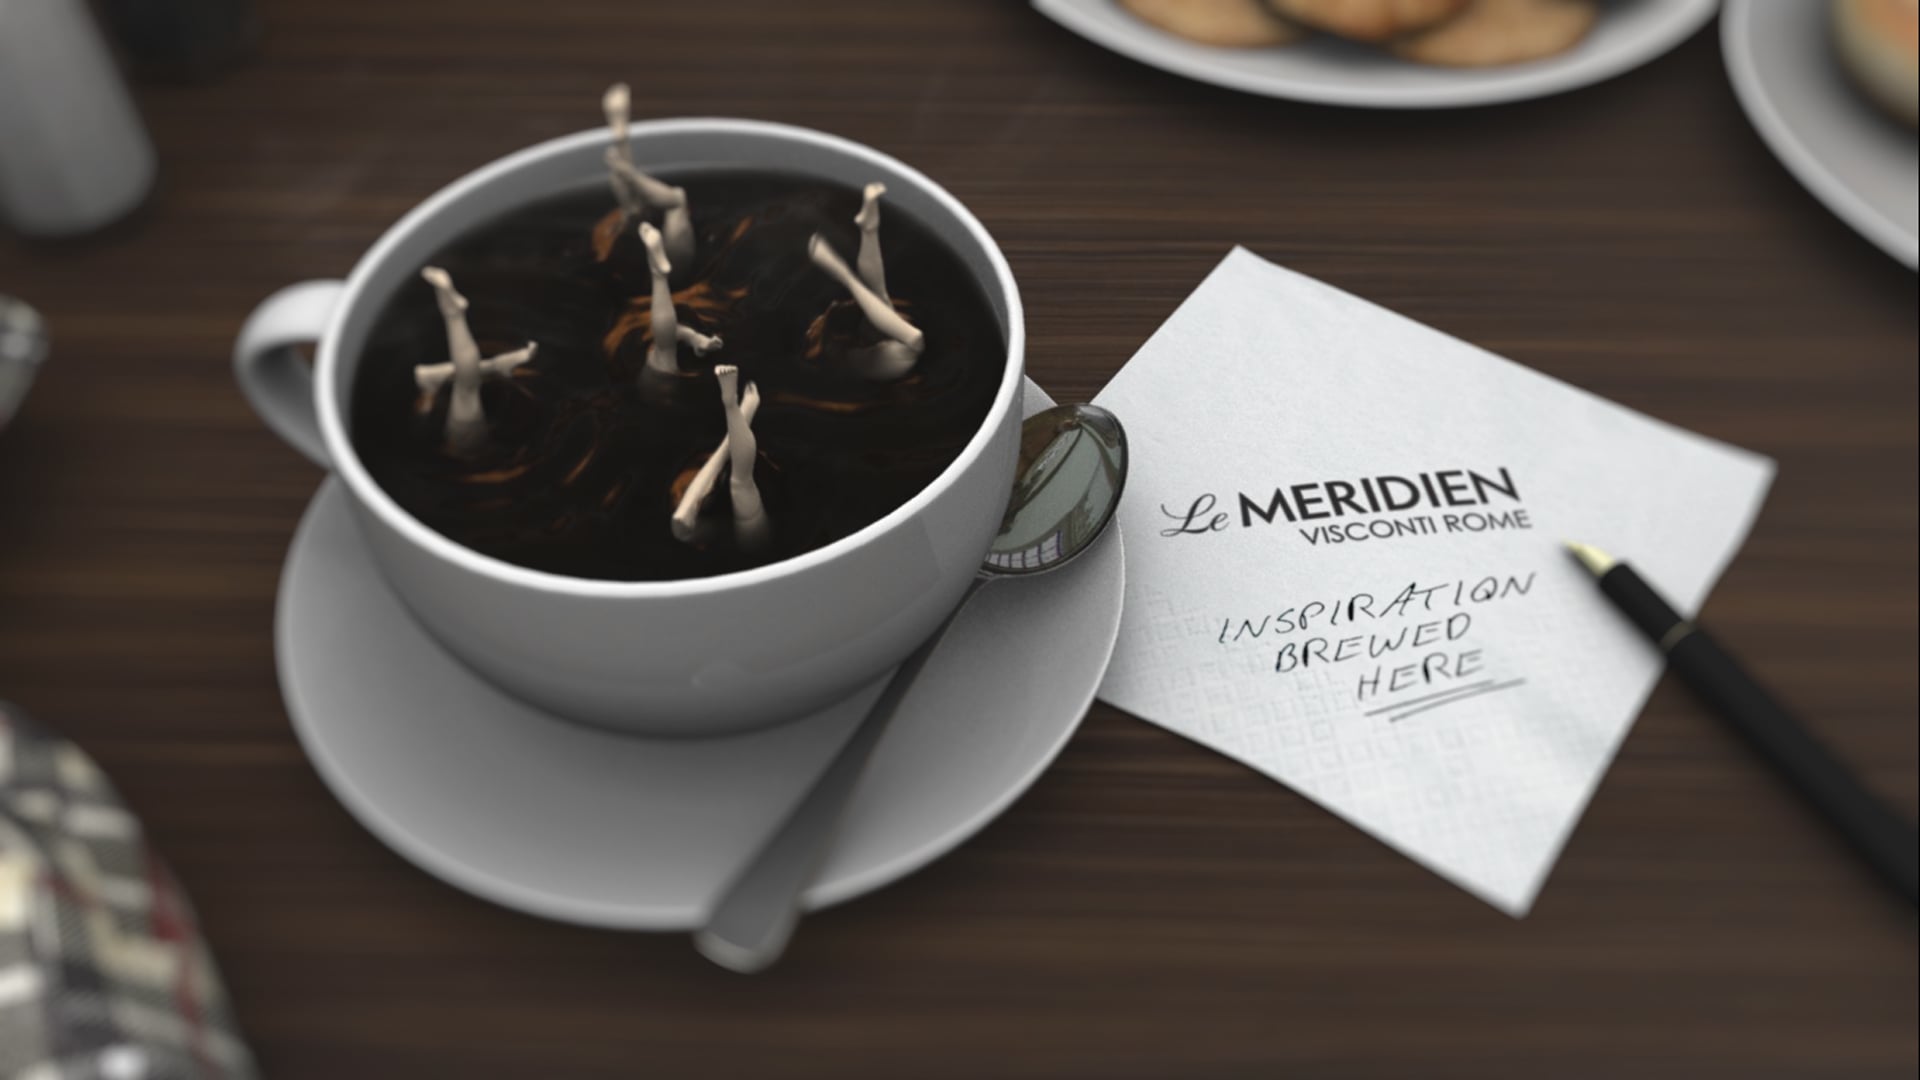 Le Méridien: Synchronized Coffee Swimming